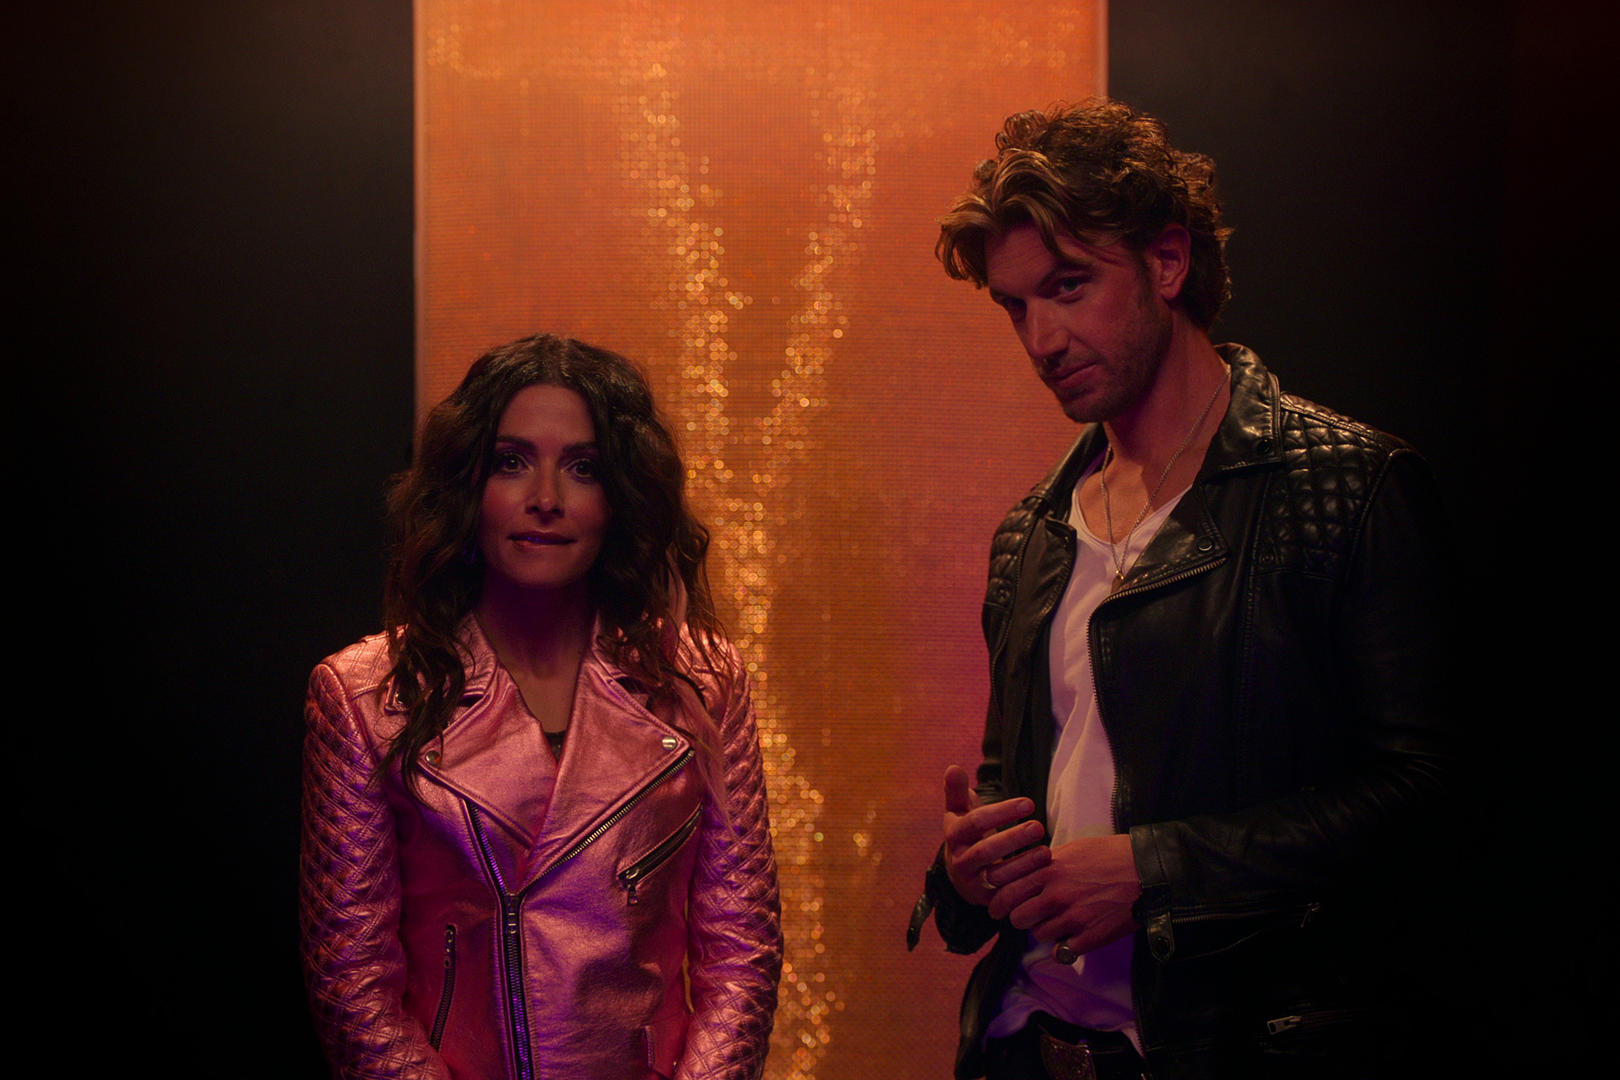 Sex/Life Trailer Sarah Shahi Dreams Of Her Wild Past In Netflixs Latest Drama Series image pic